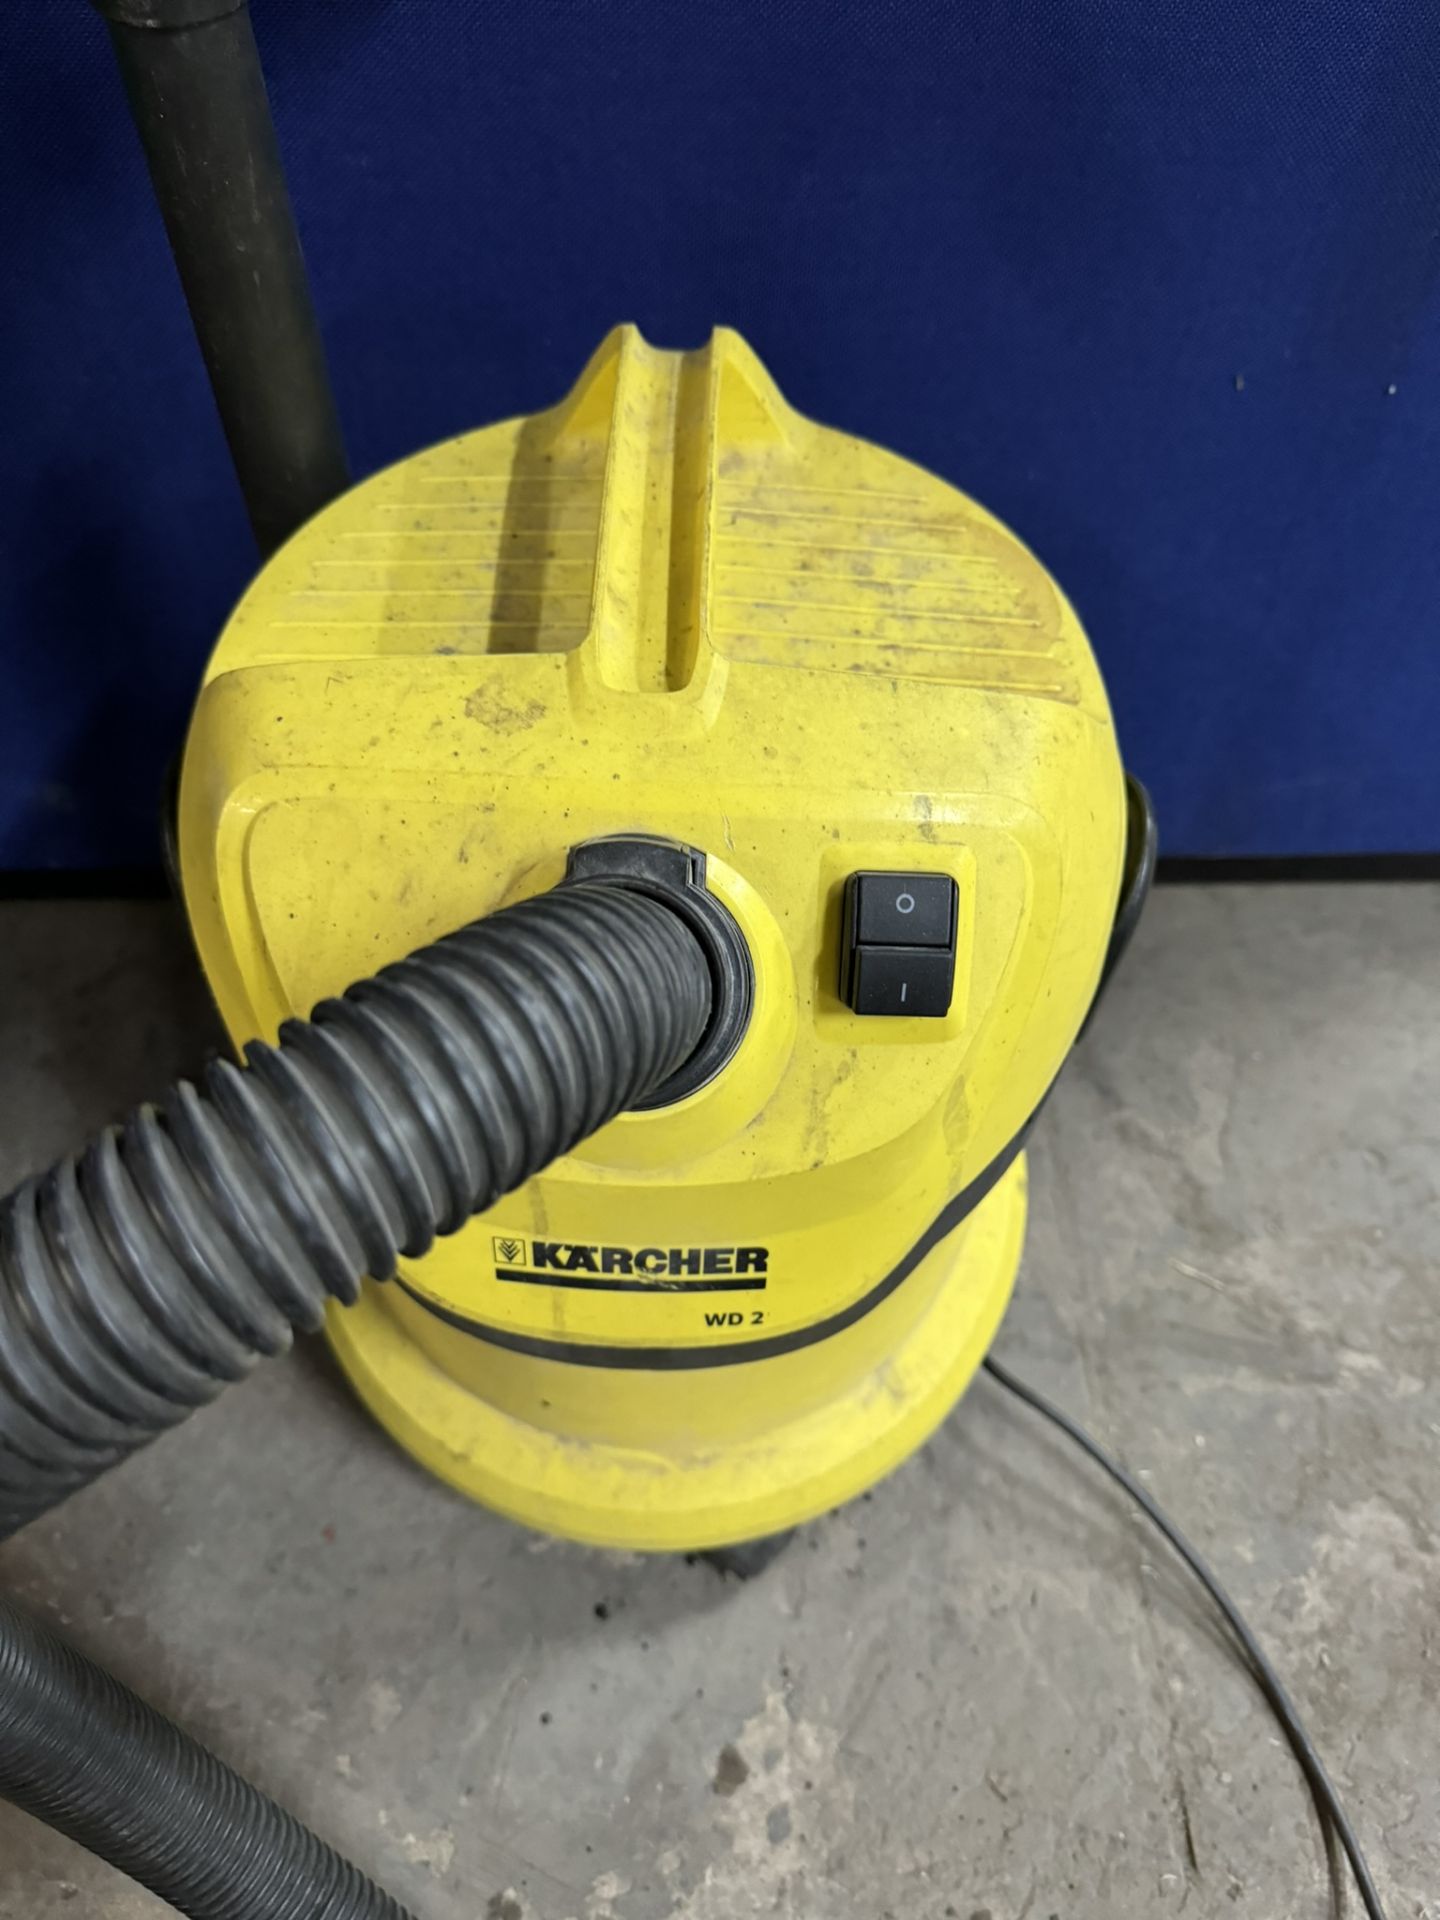 Karcher WD2 Cylinder Wet and Dry Vacuum Cleaner - Image 2 of 4